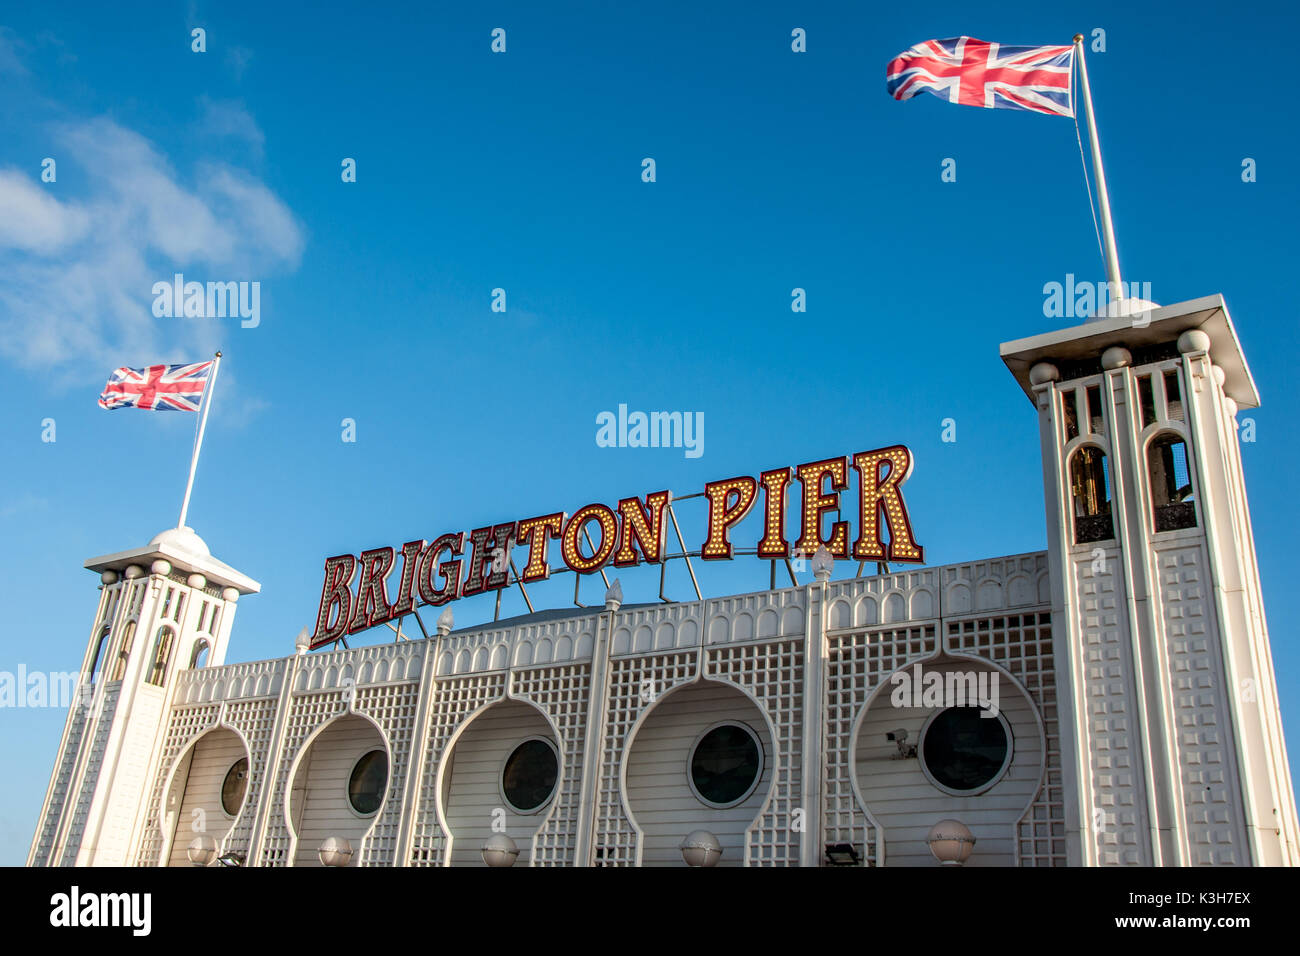 Lighted sign on the Brighton pier, East Sussex, United Kingdom Stock Photo